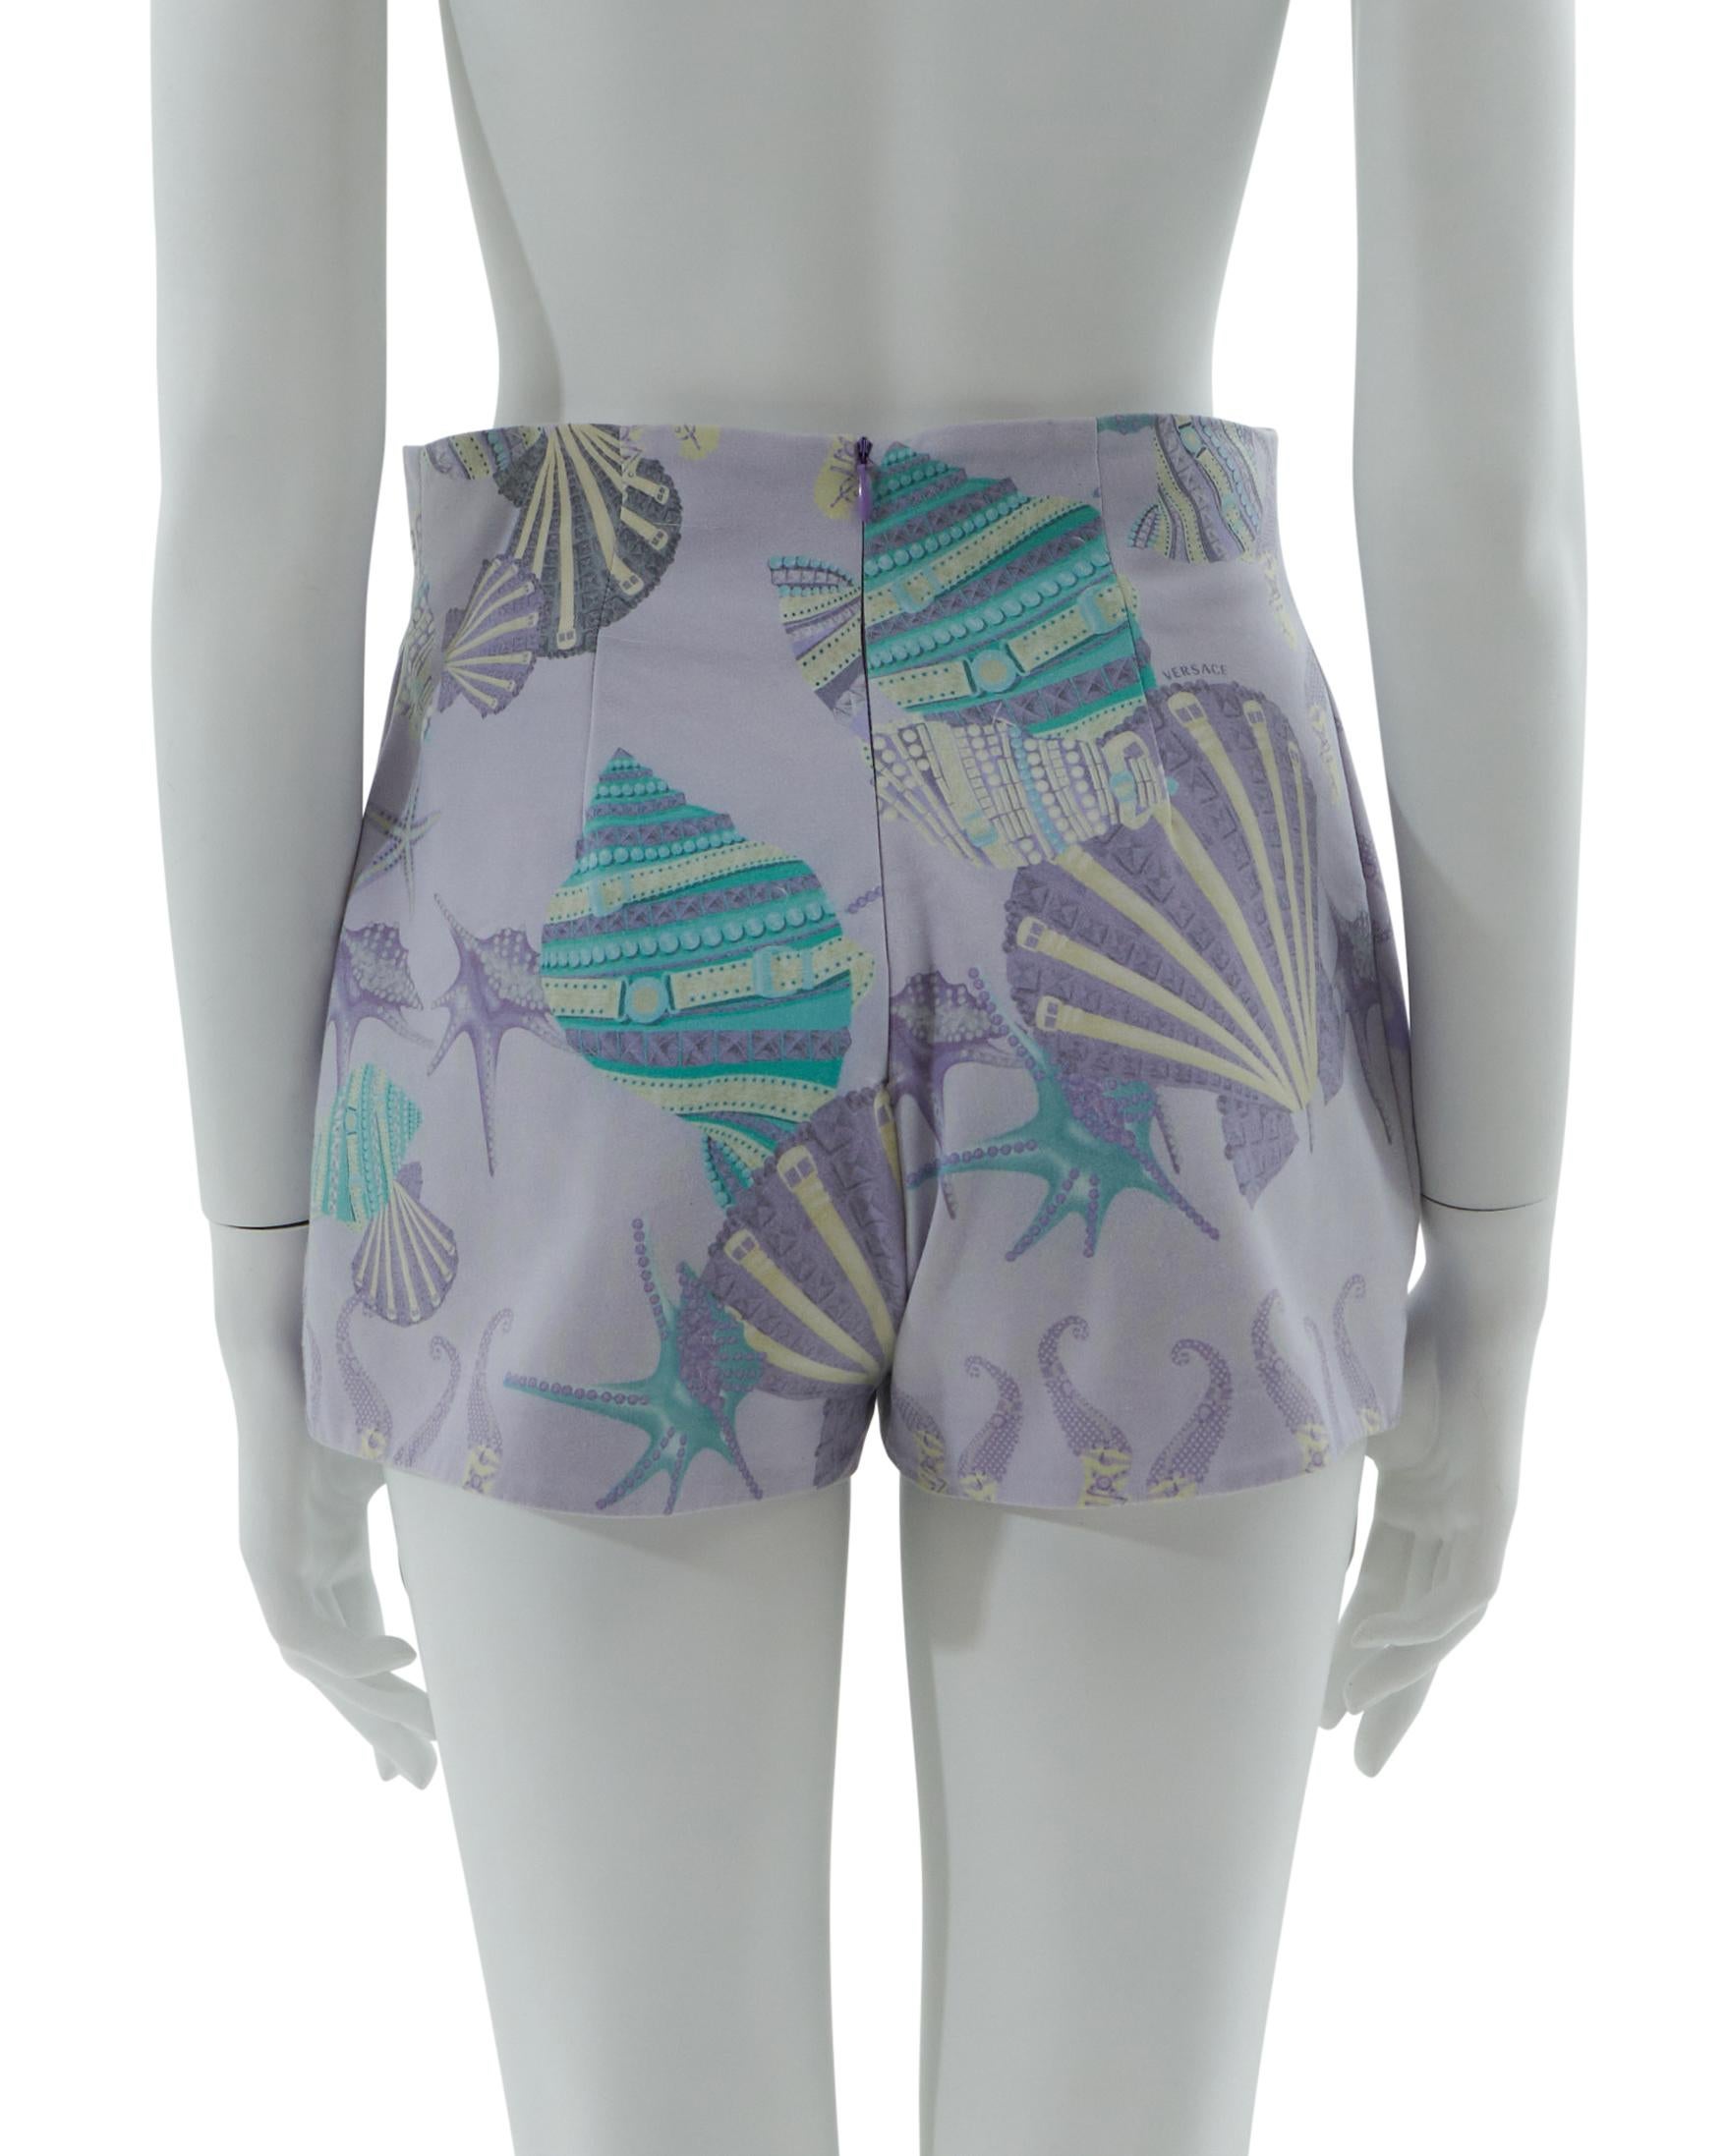 Versace S/S 2012 Seashell printed shorts  In Excellent Condition For Sale In Milano, IT